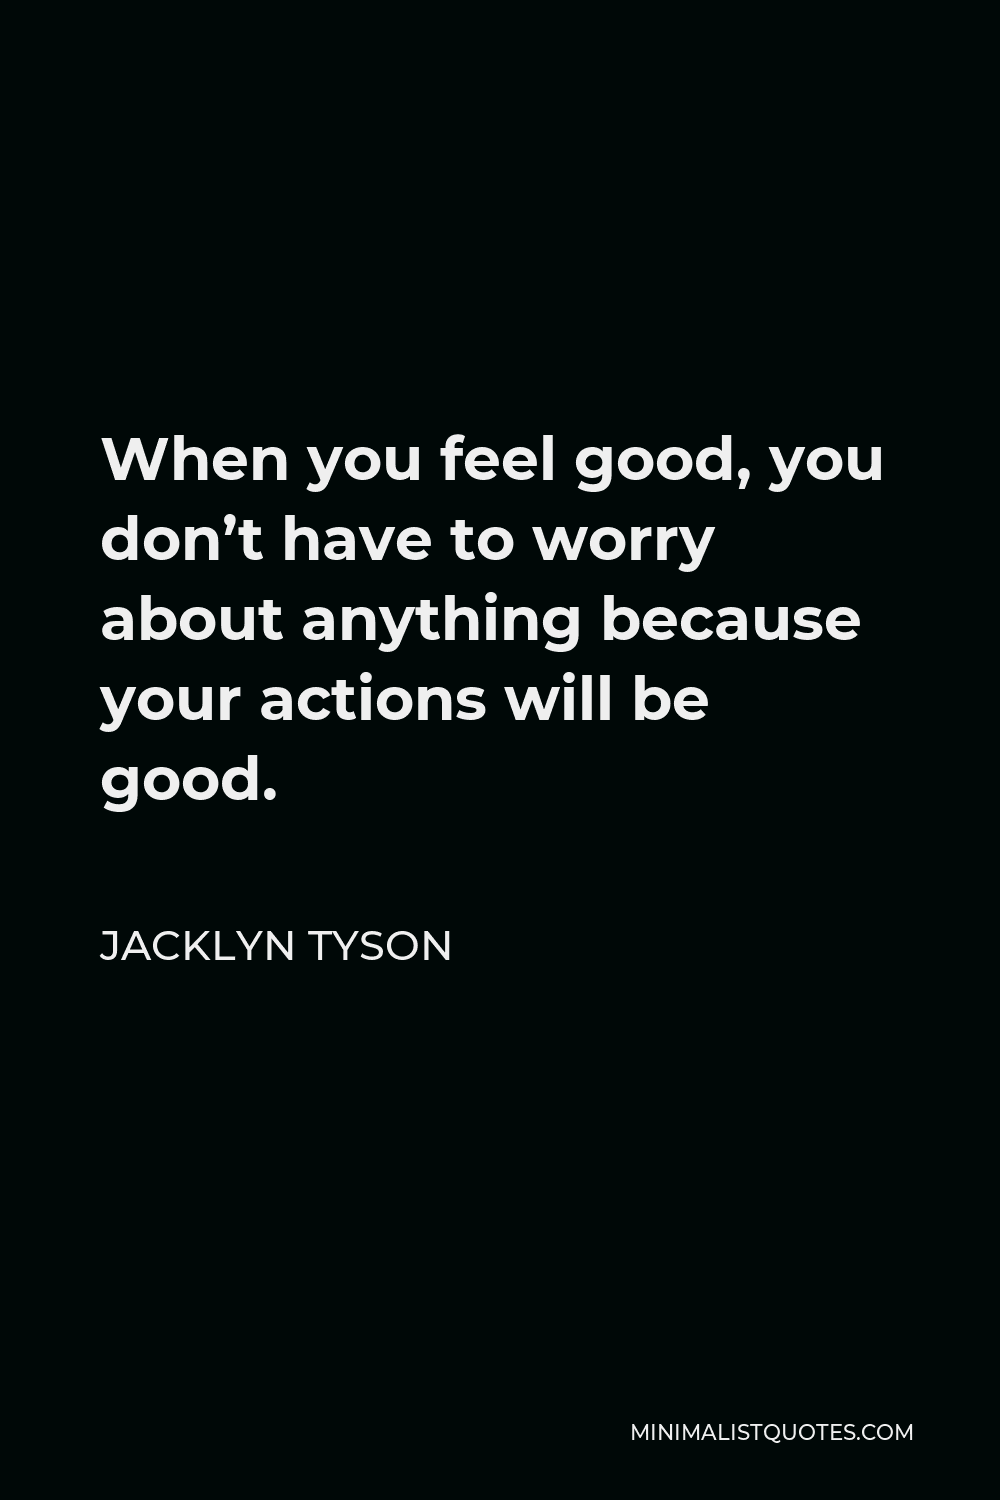 Jacklyn Tyson Quote - When you feel good, you don’t have to worry about anything because your actions will be good.